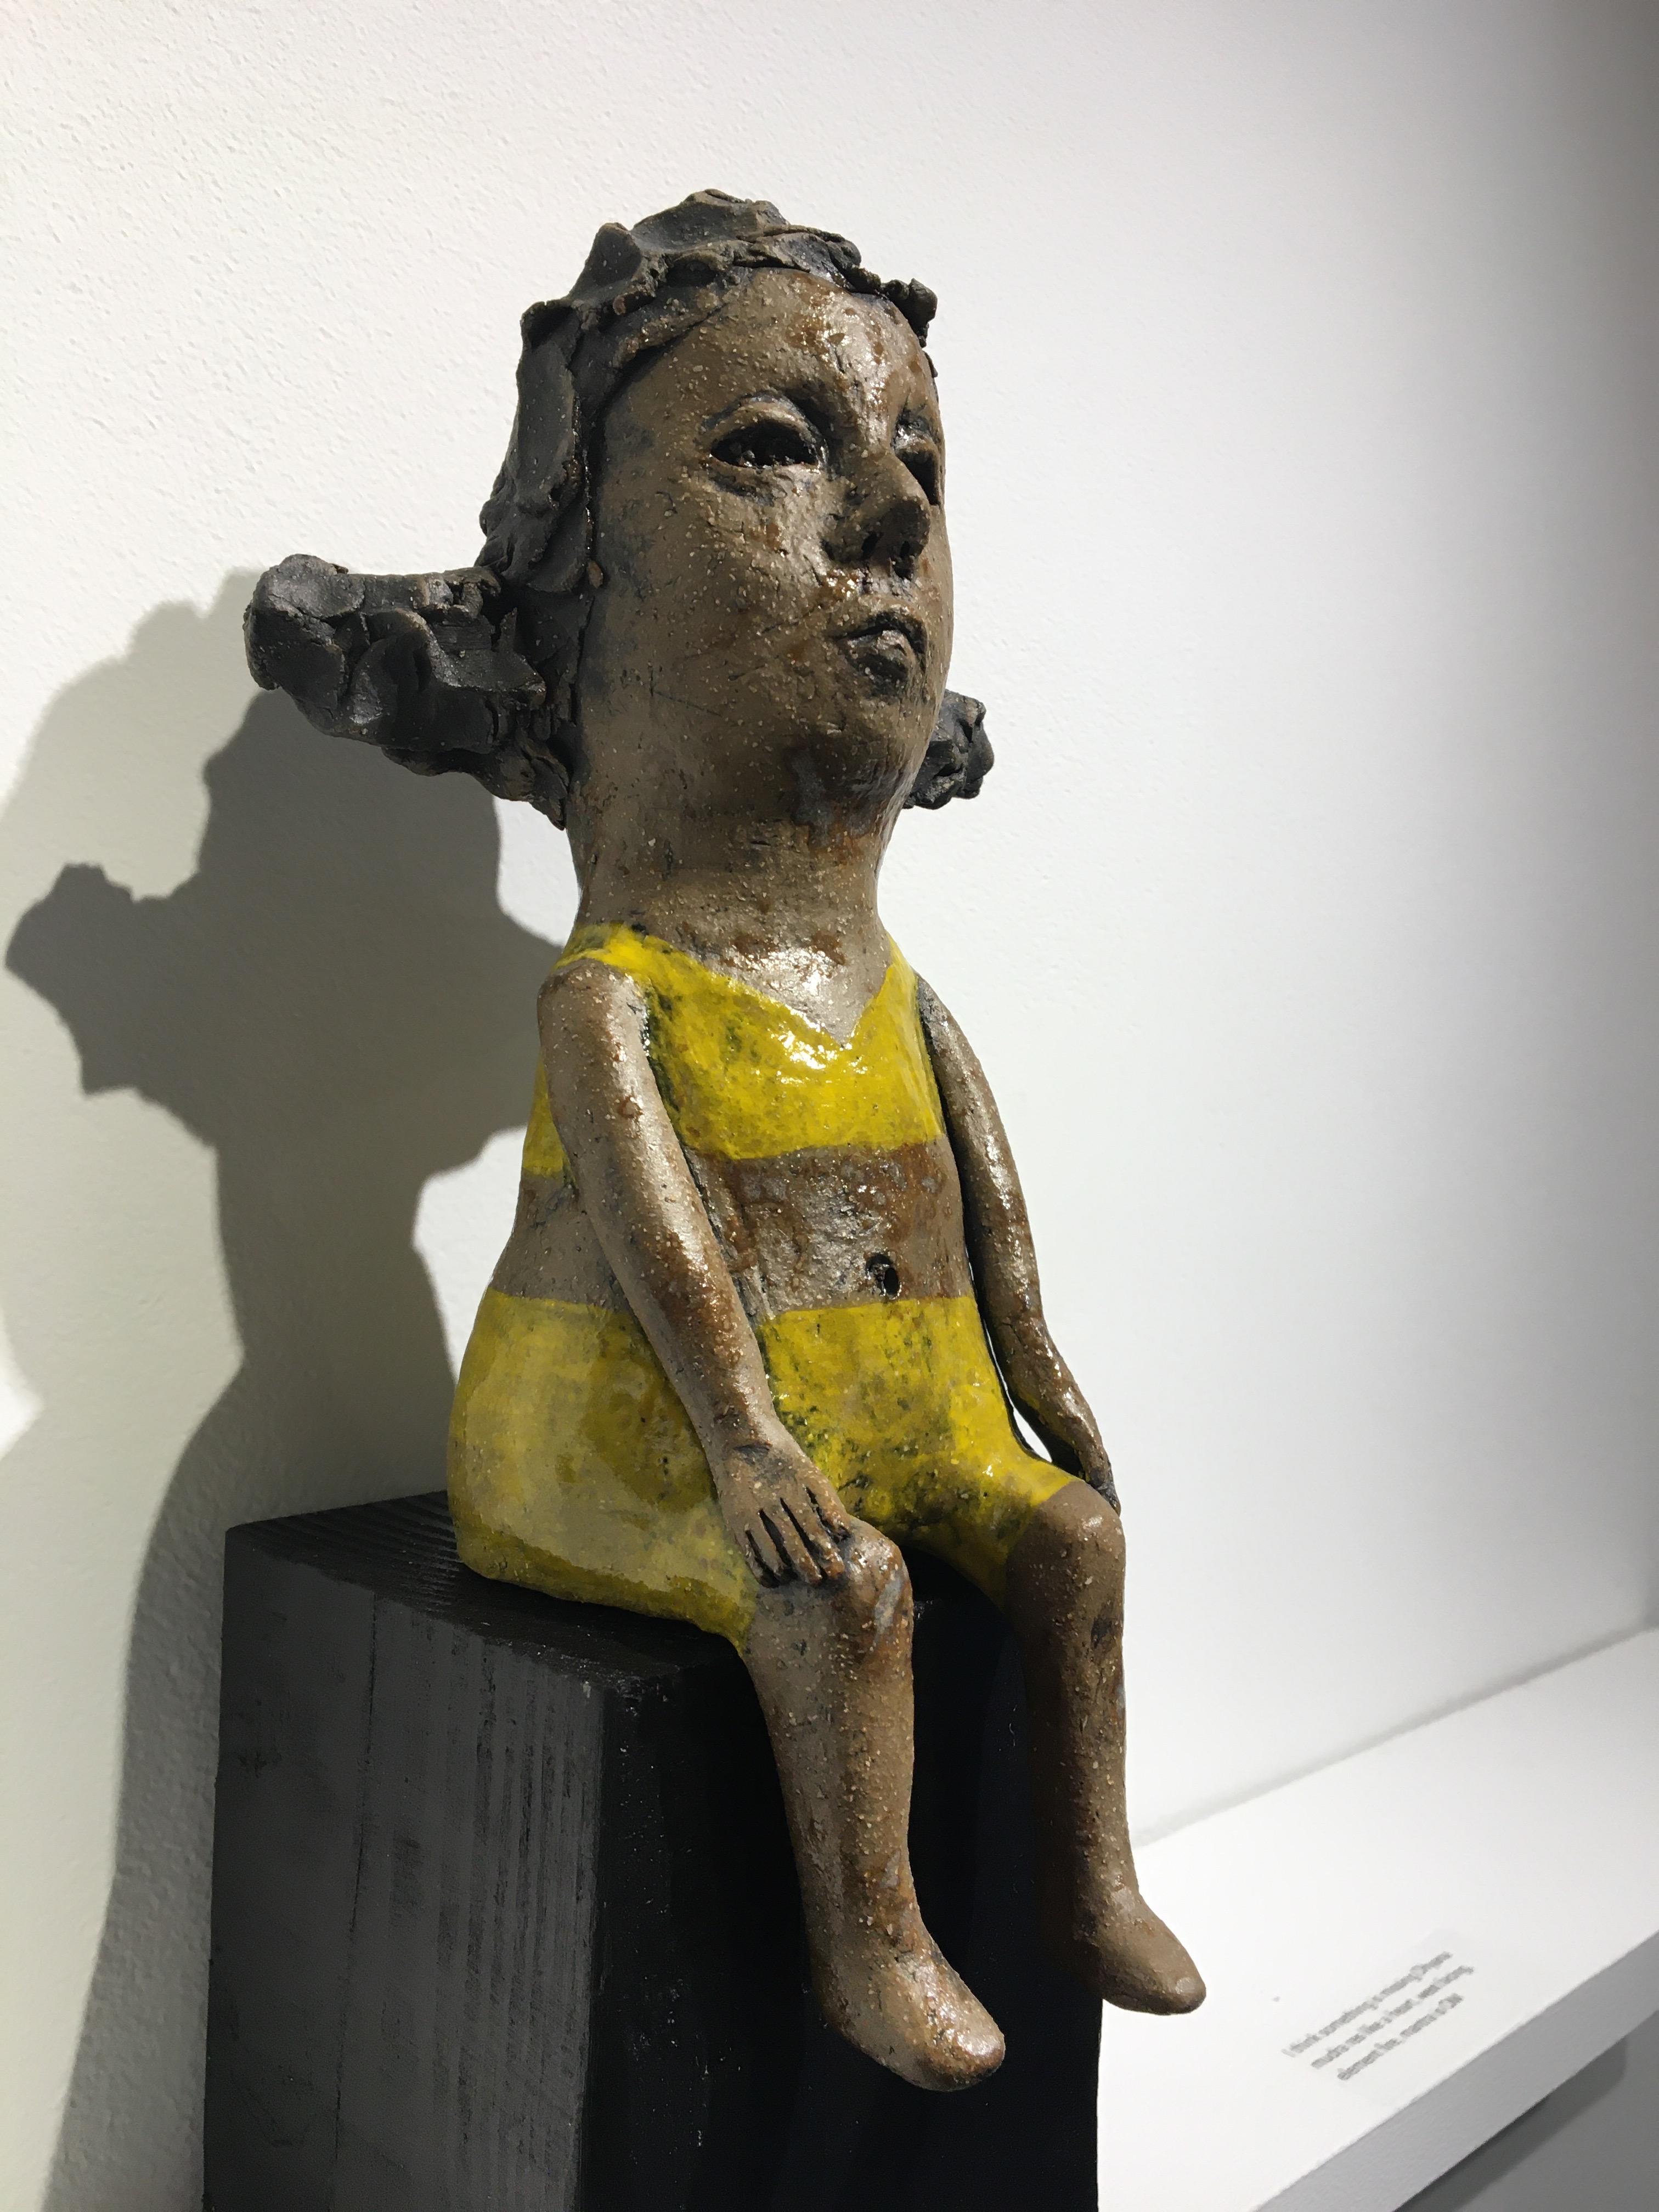 Ceramic figure on wood block: 'Hush up and hold me tight' - Contemporary Sculpture by Ashley Benton